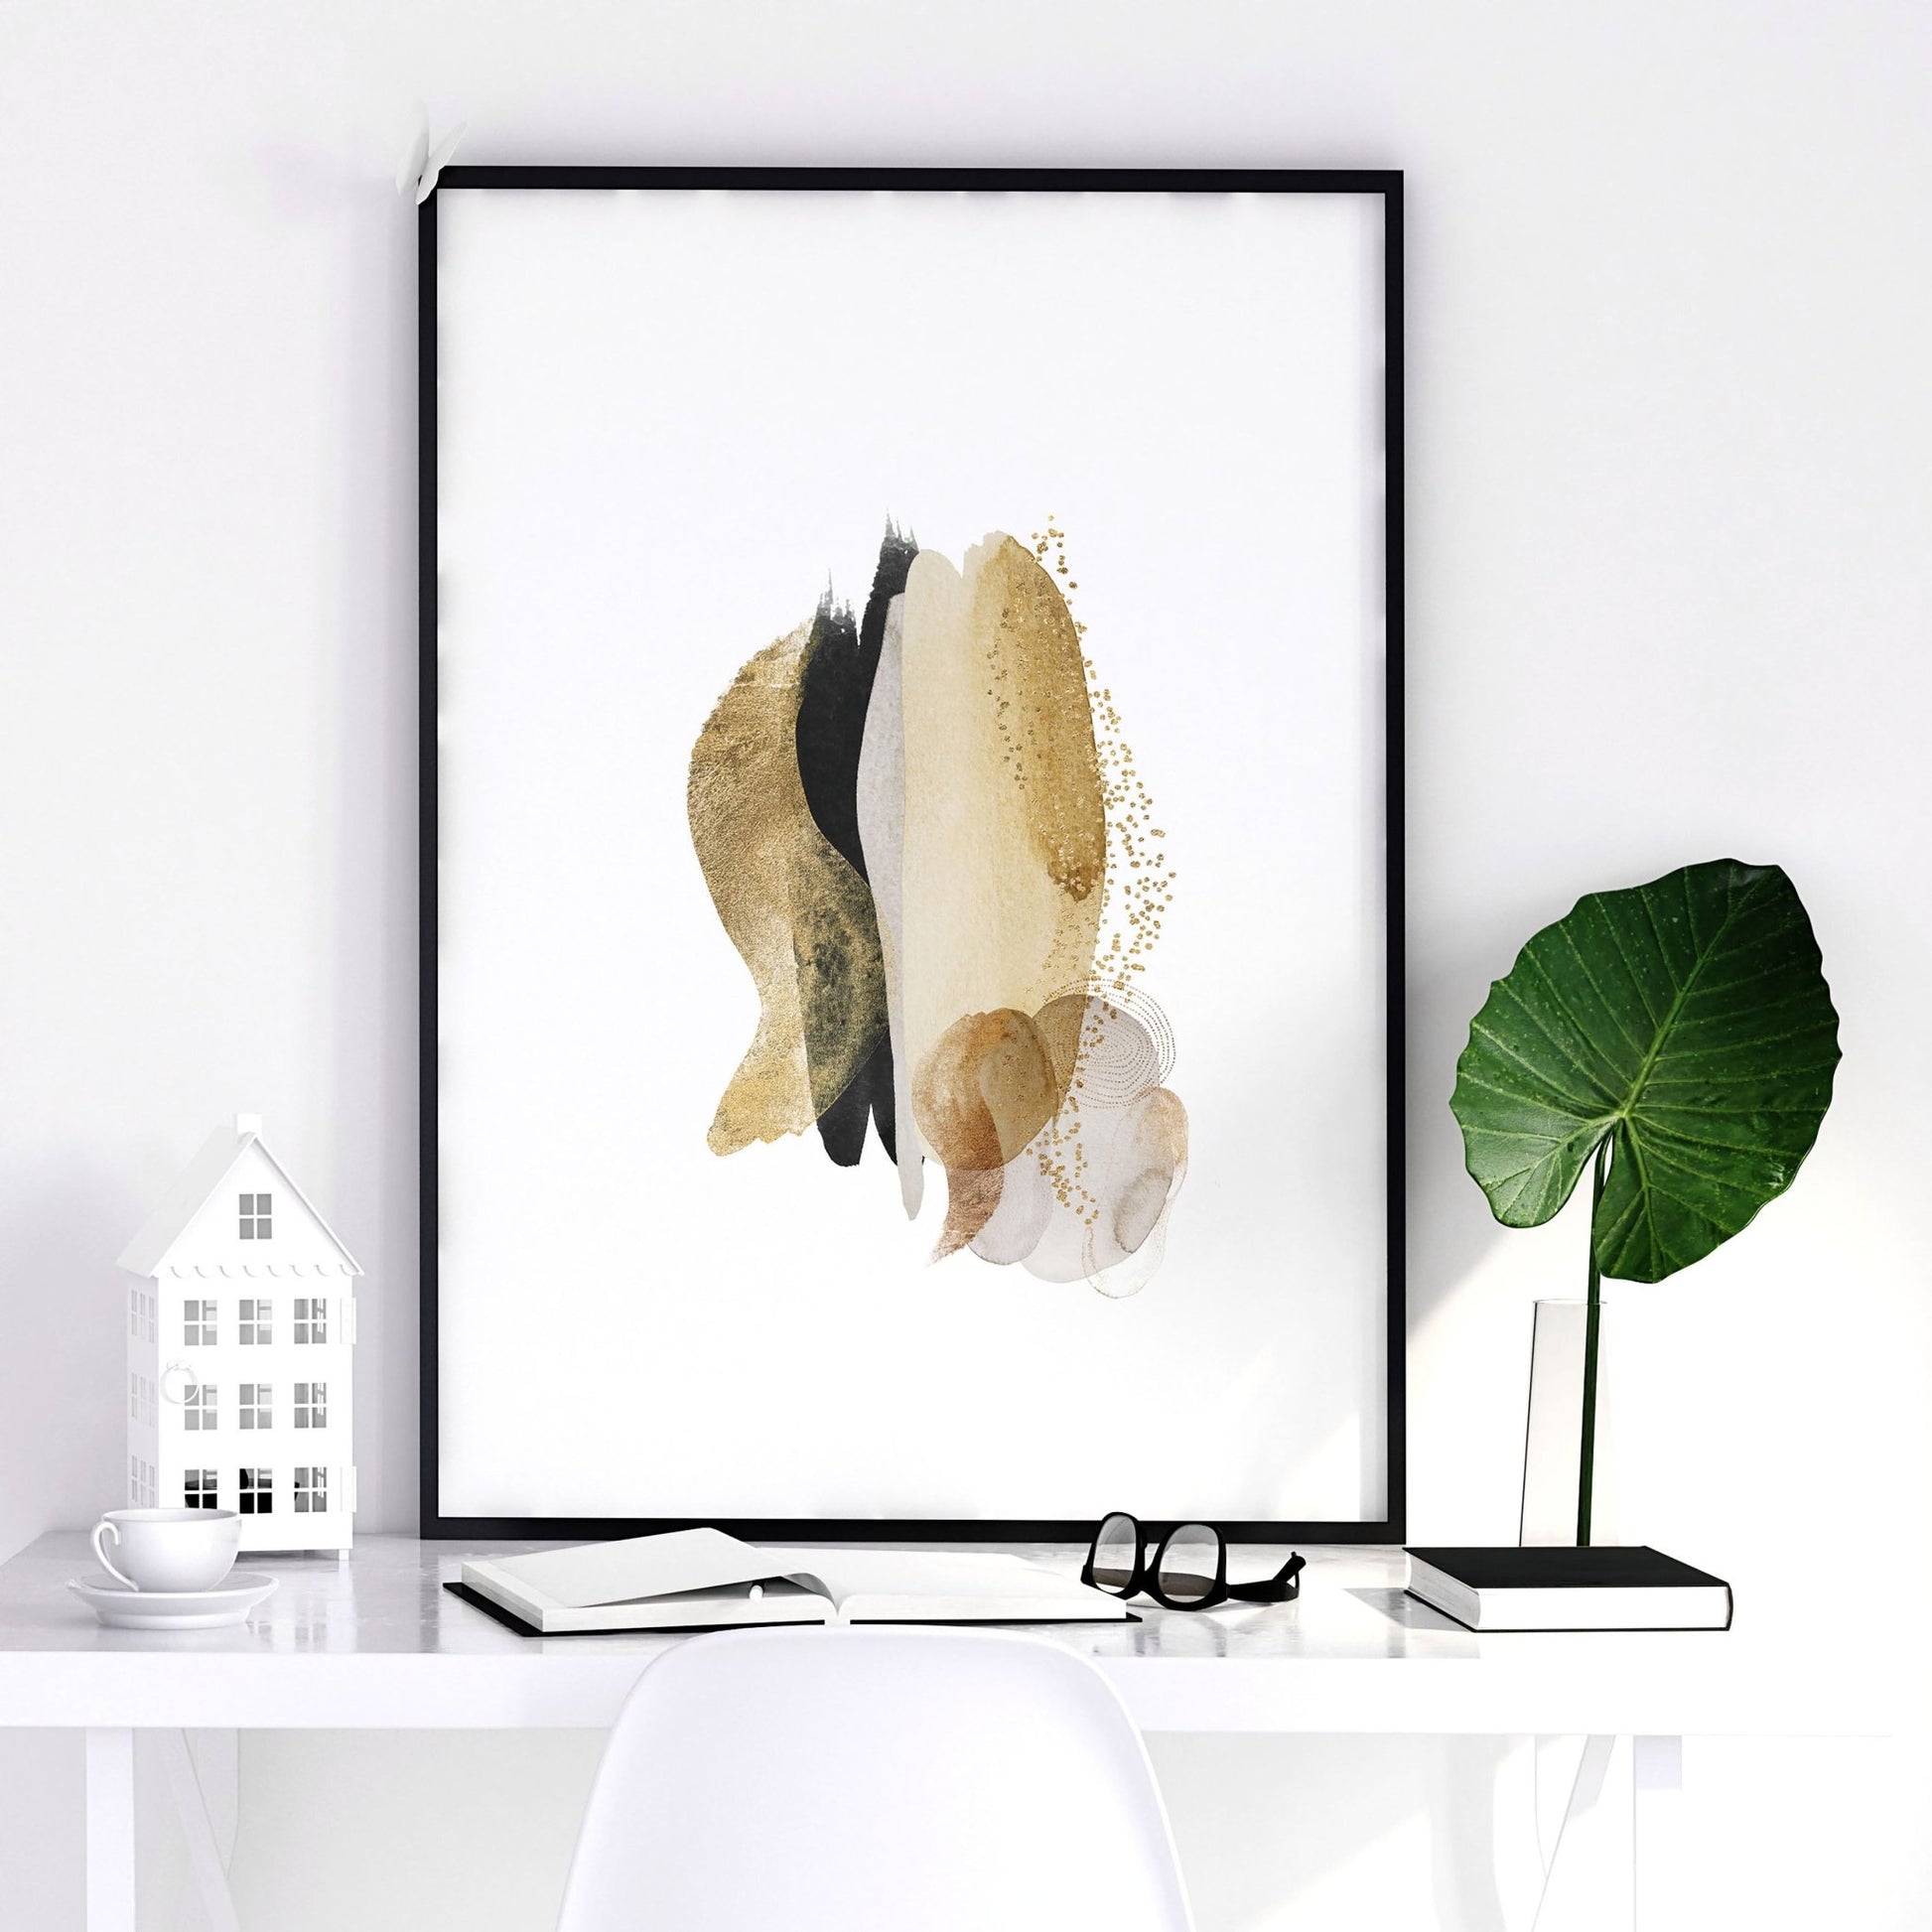 Abstract wall art for office | set of 3 wall art prints - About Wall Art